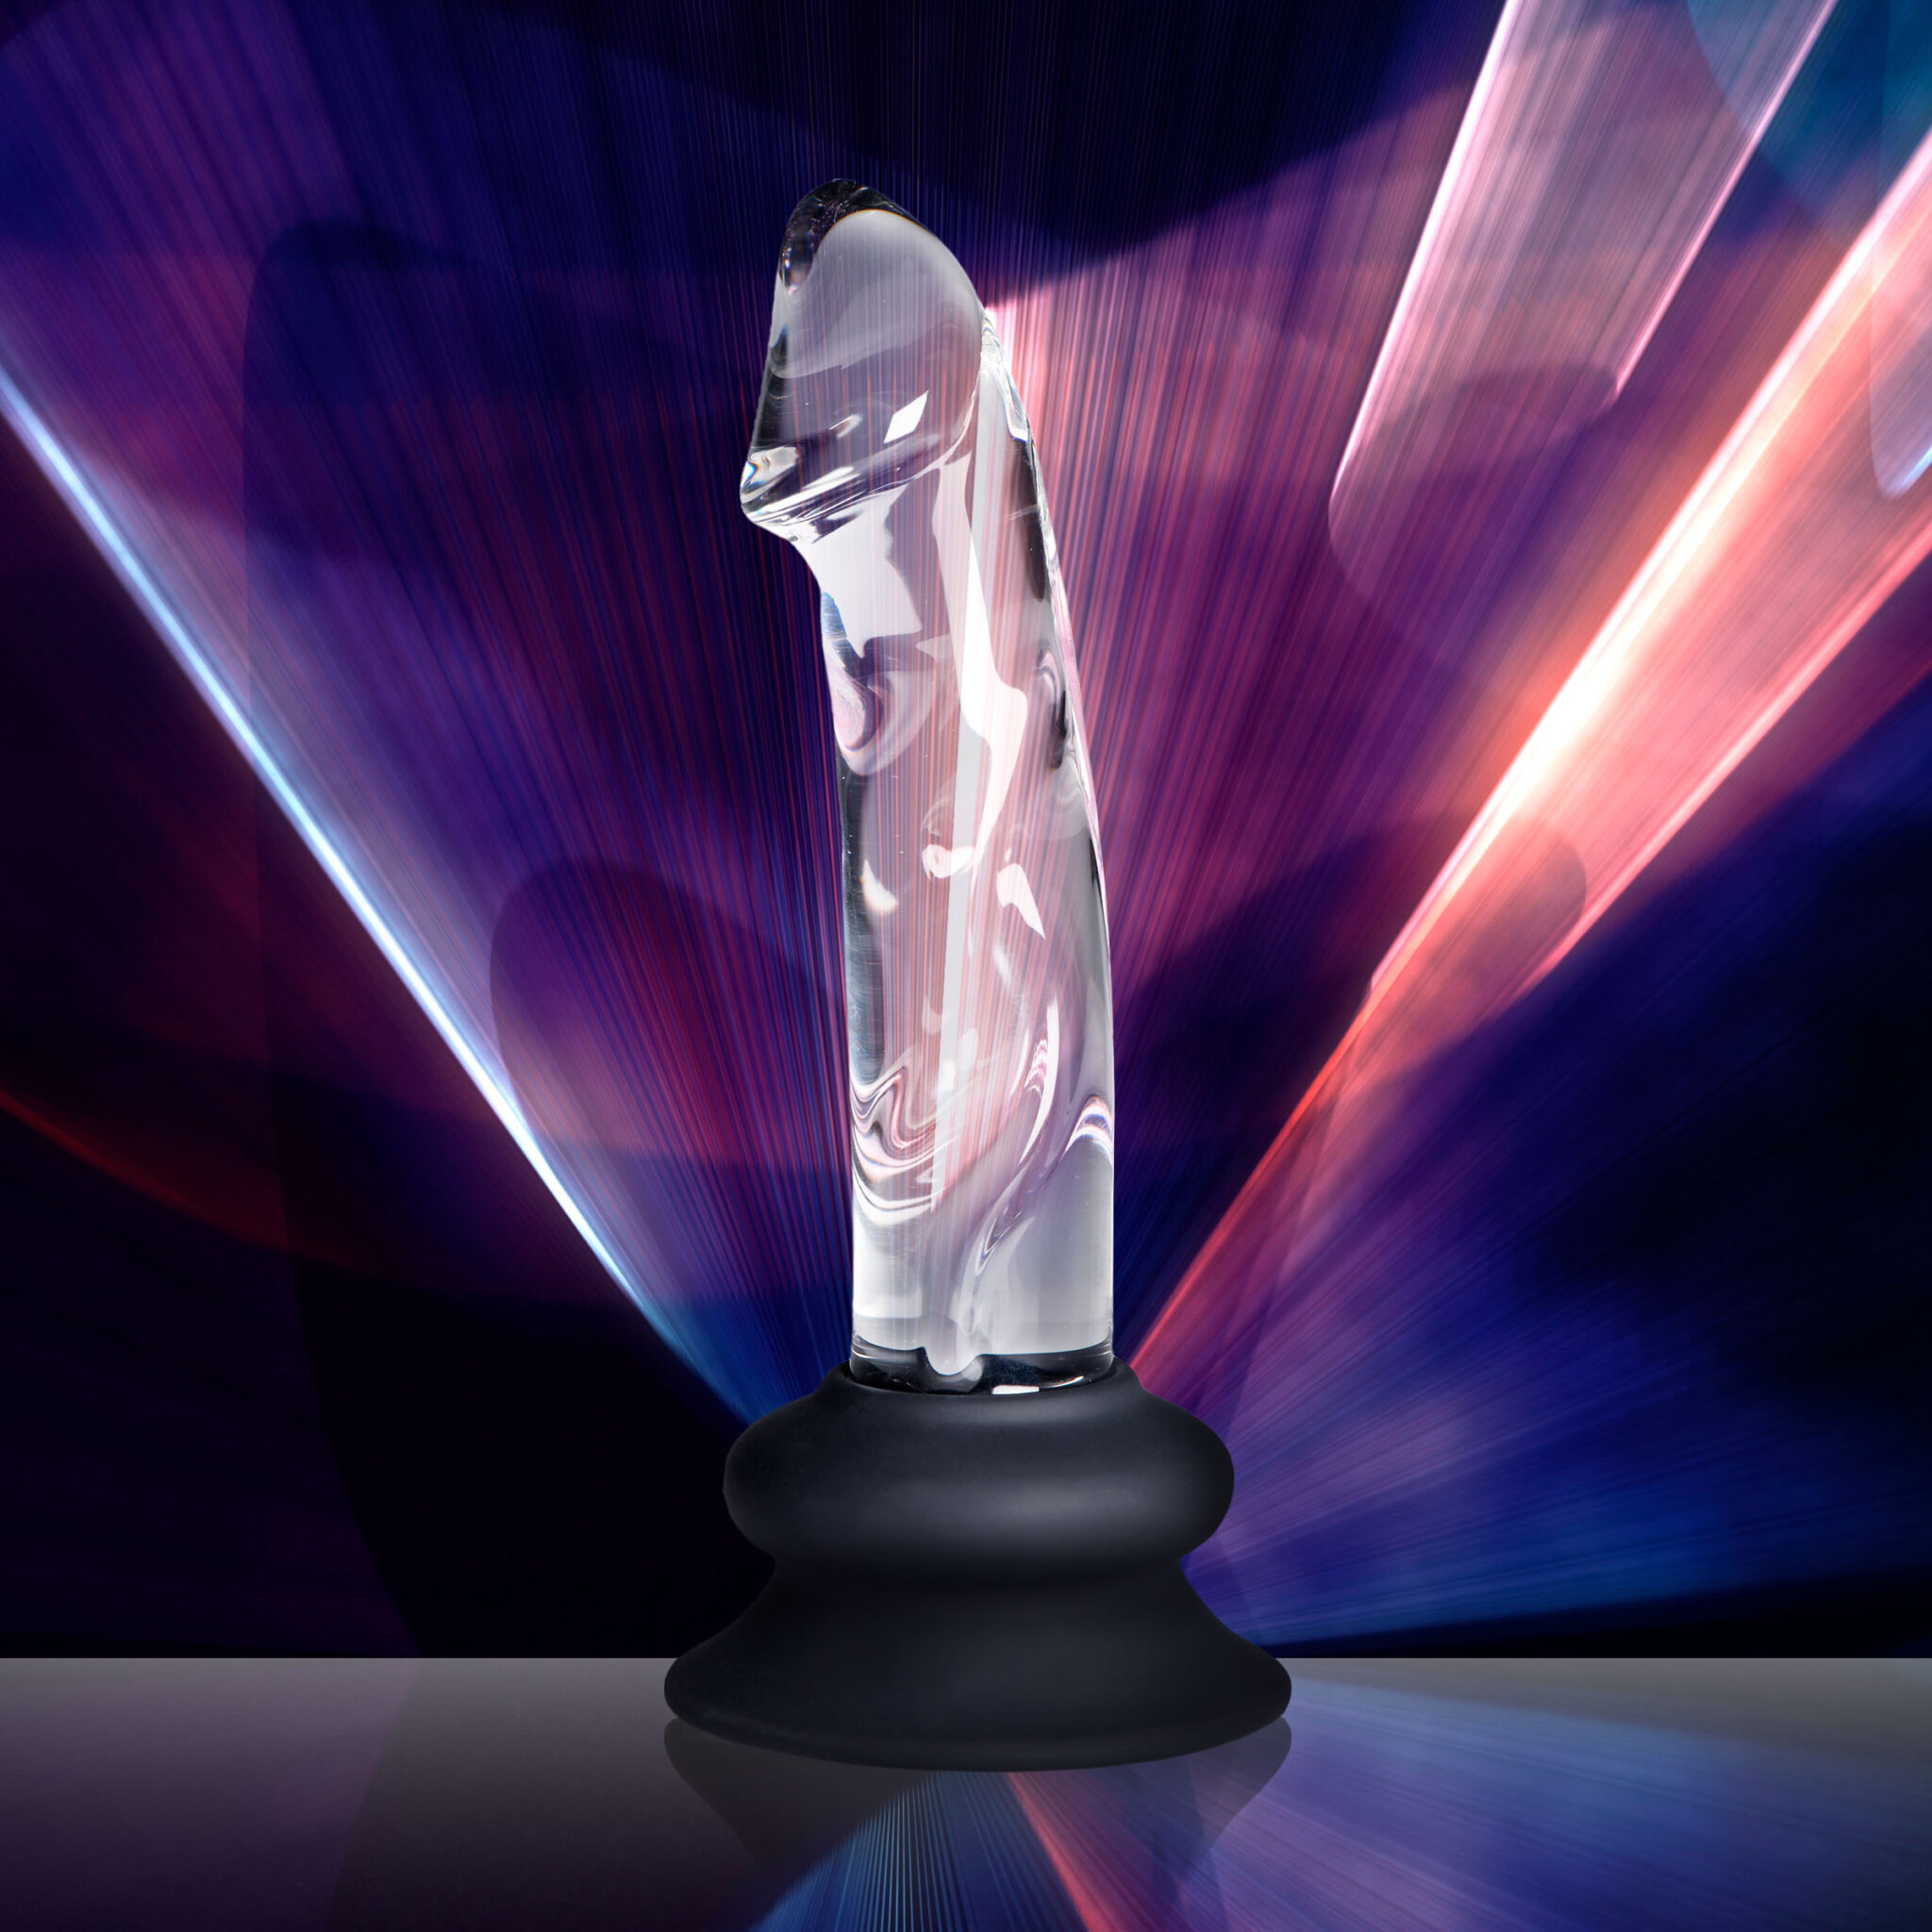 Glass Dildo with Silicone Base - 5.6 Inch-5